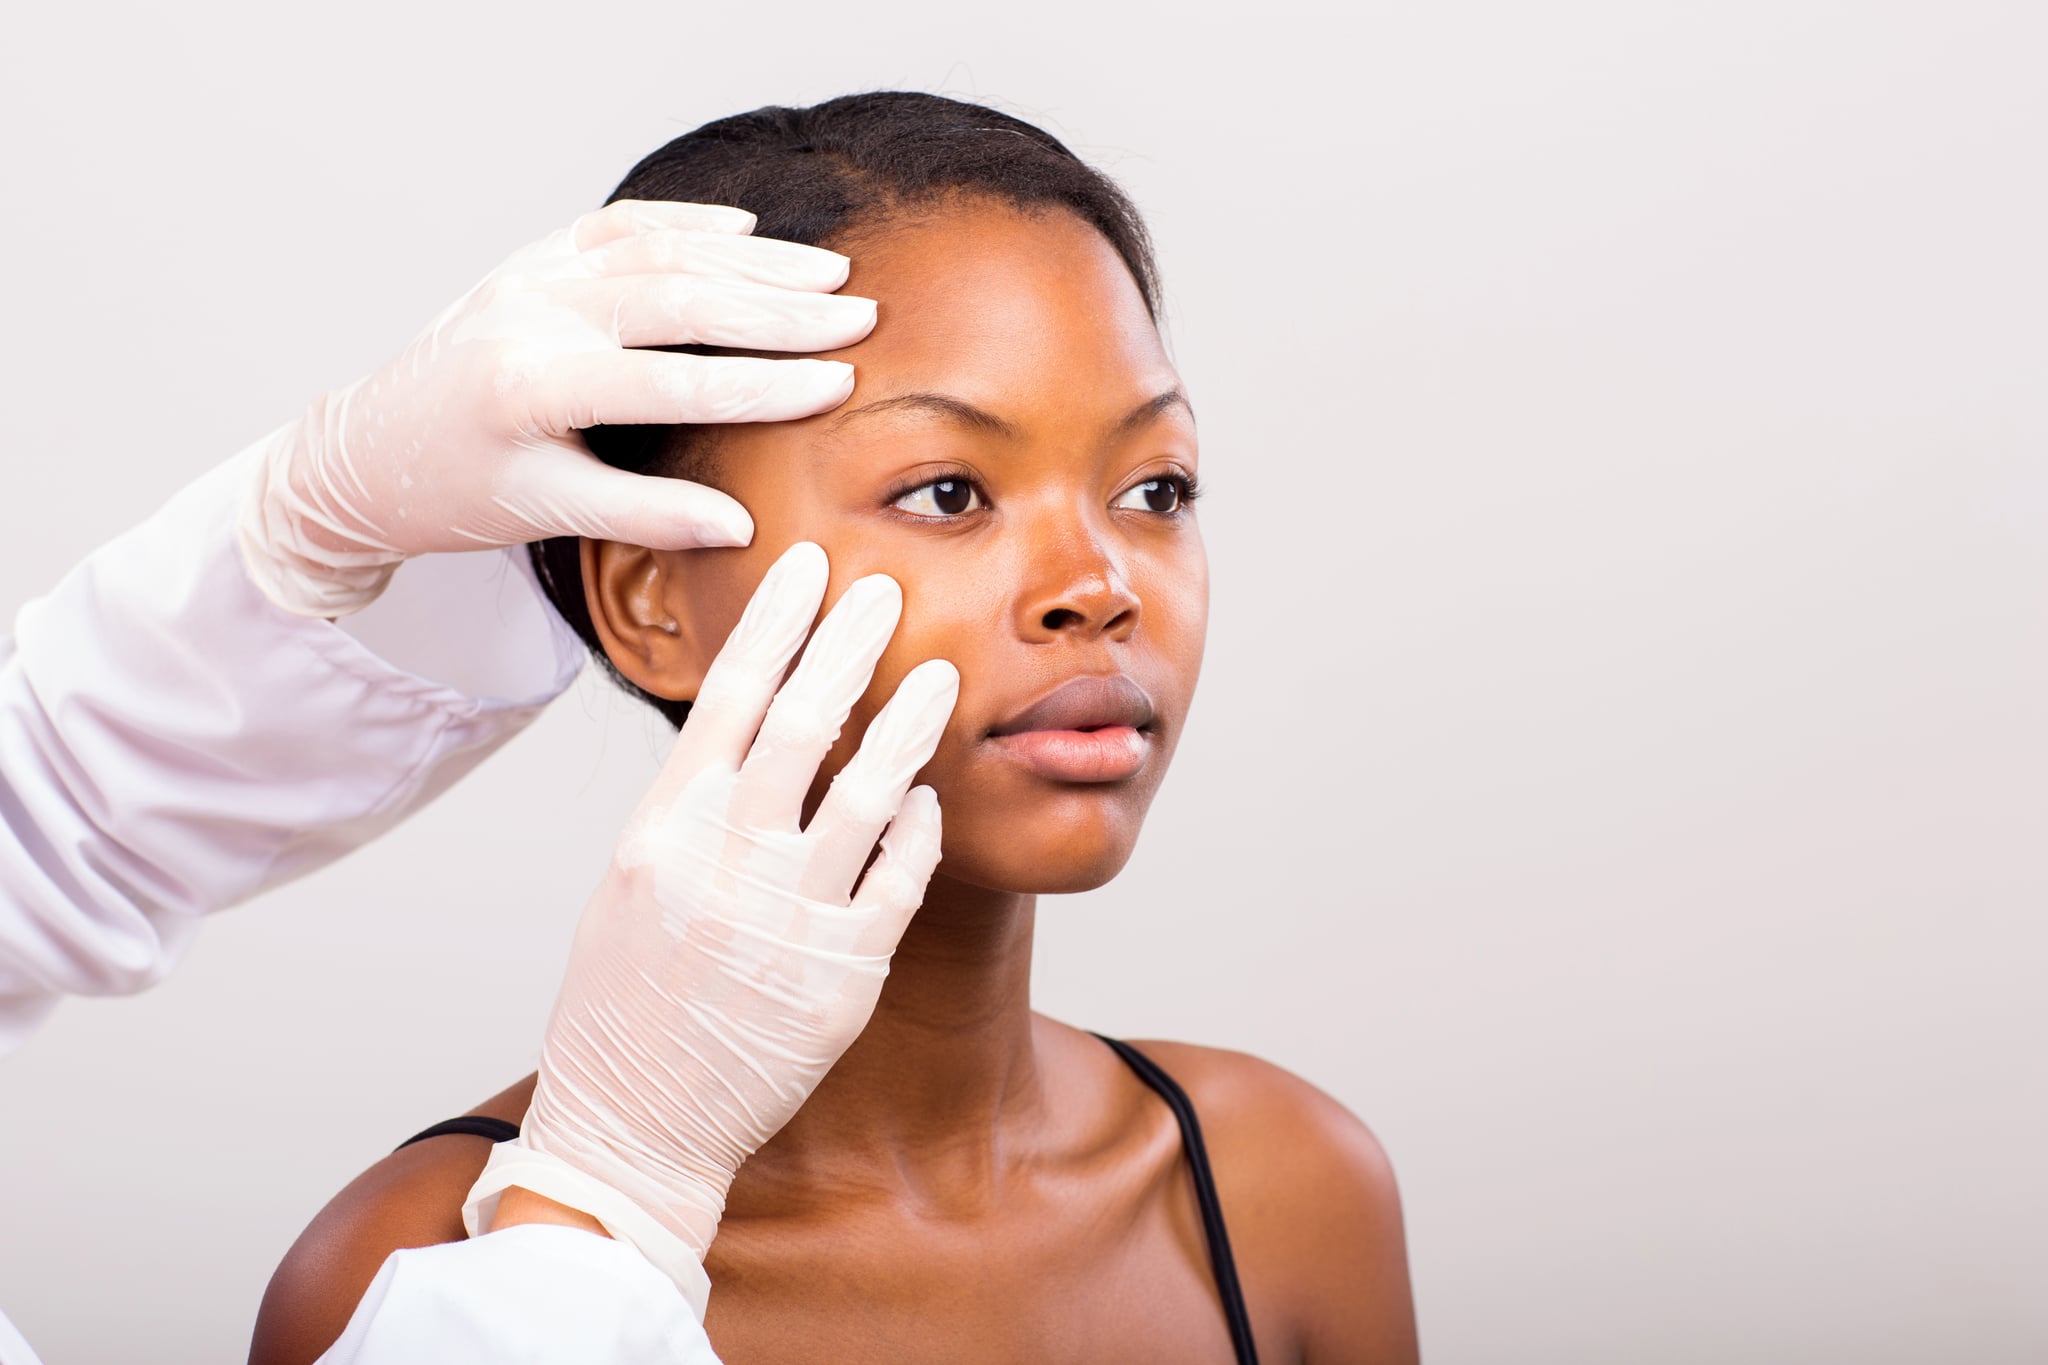 dermatologist checking young african american woman face skin on plain background